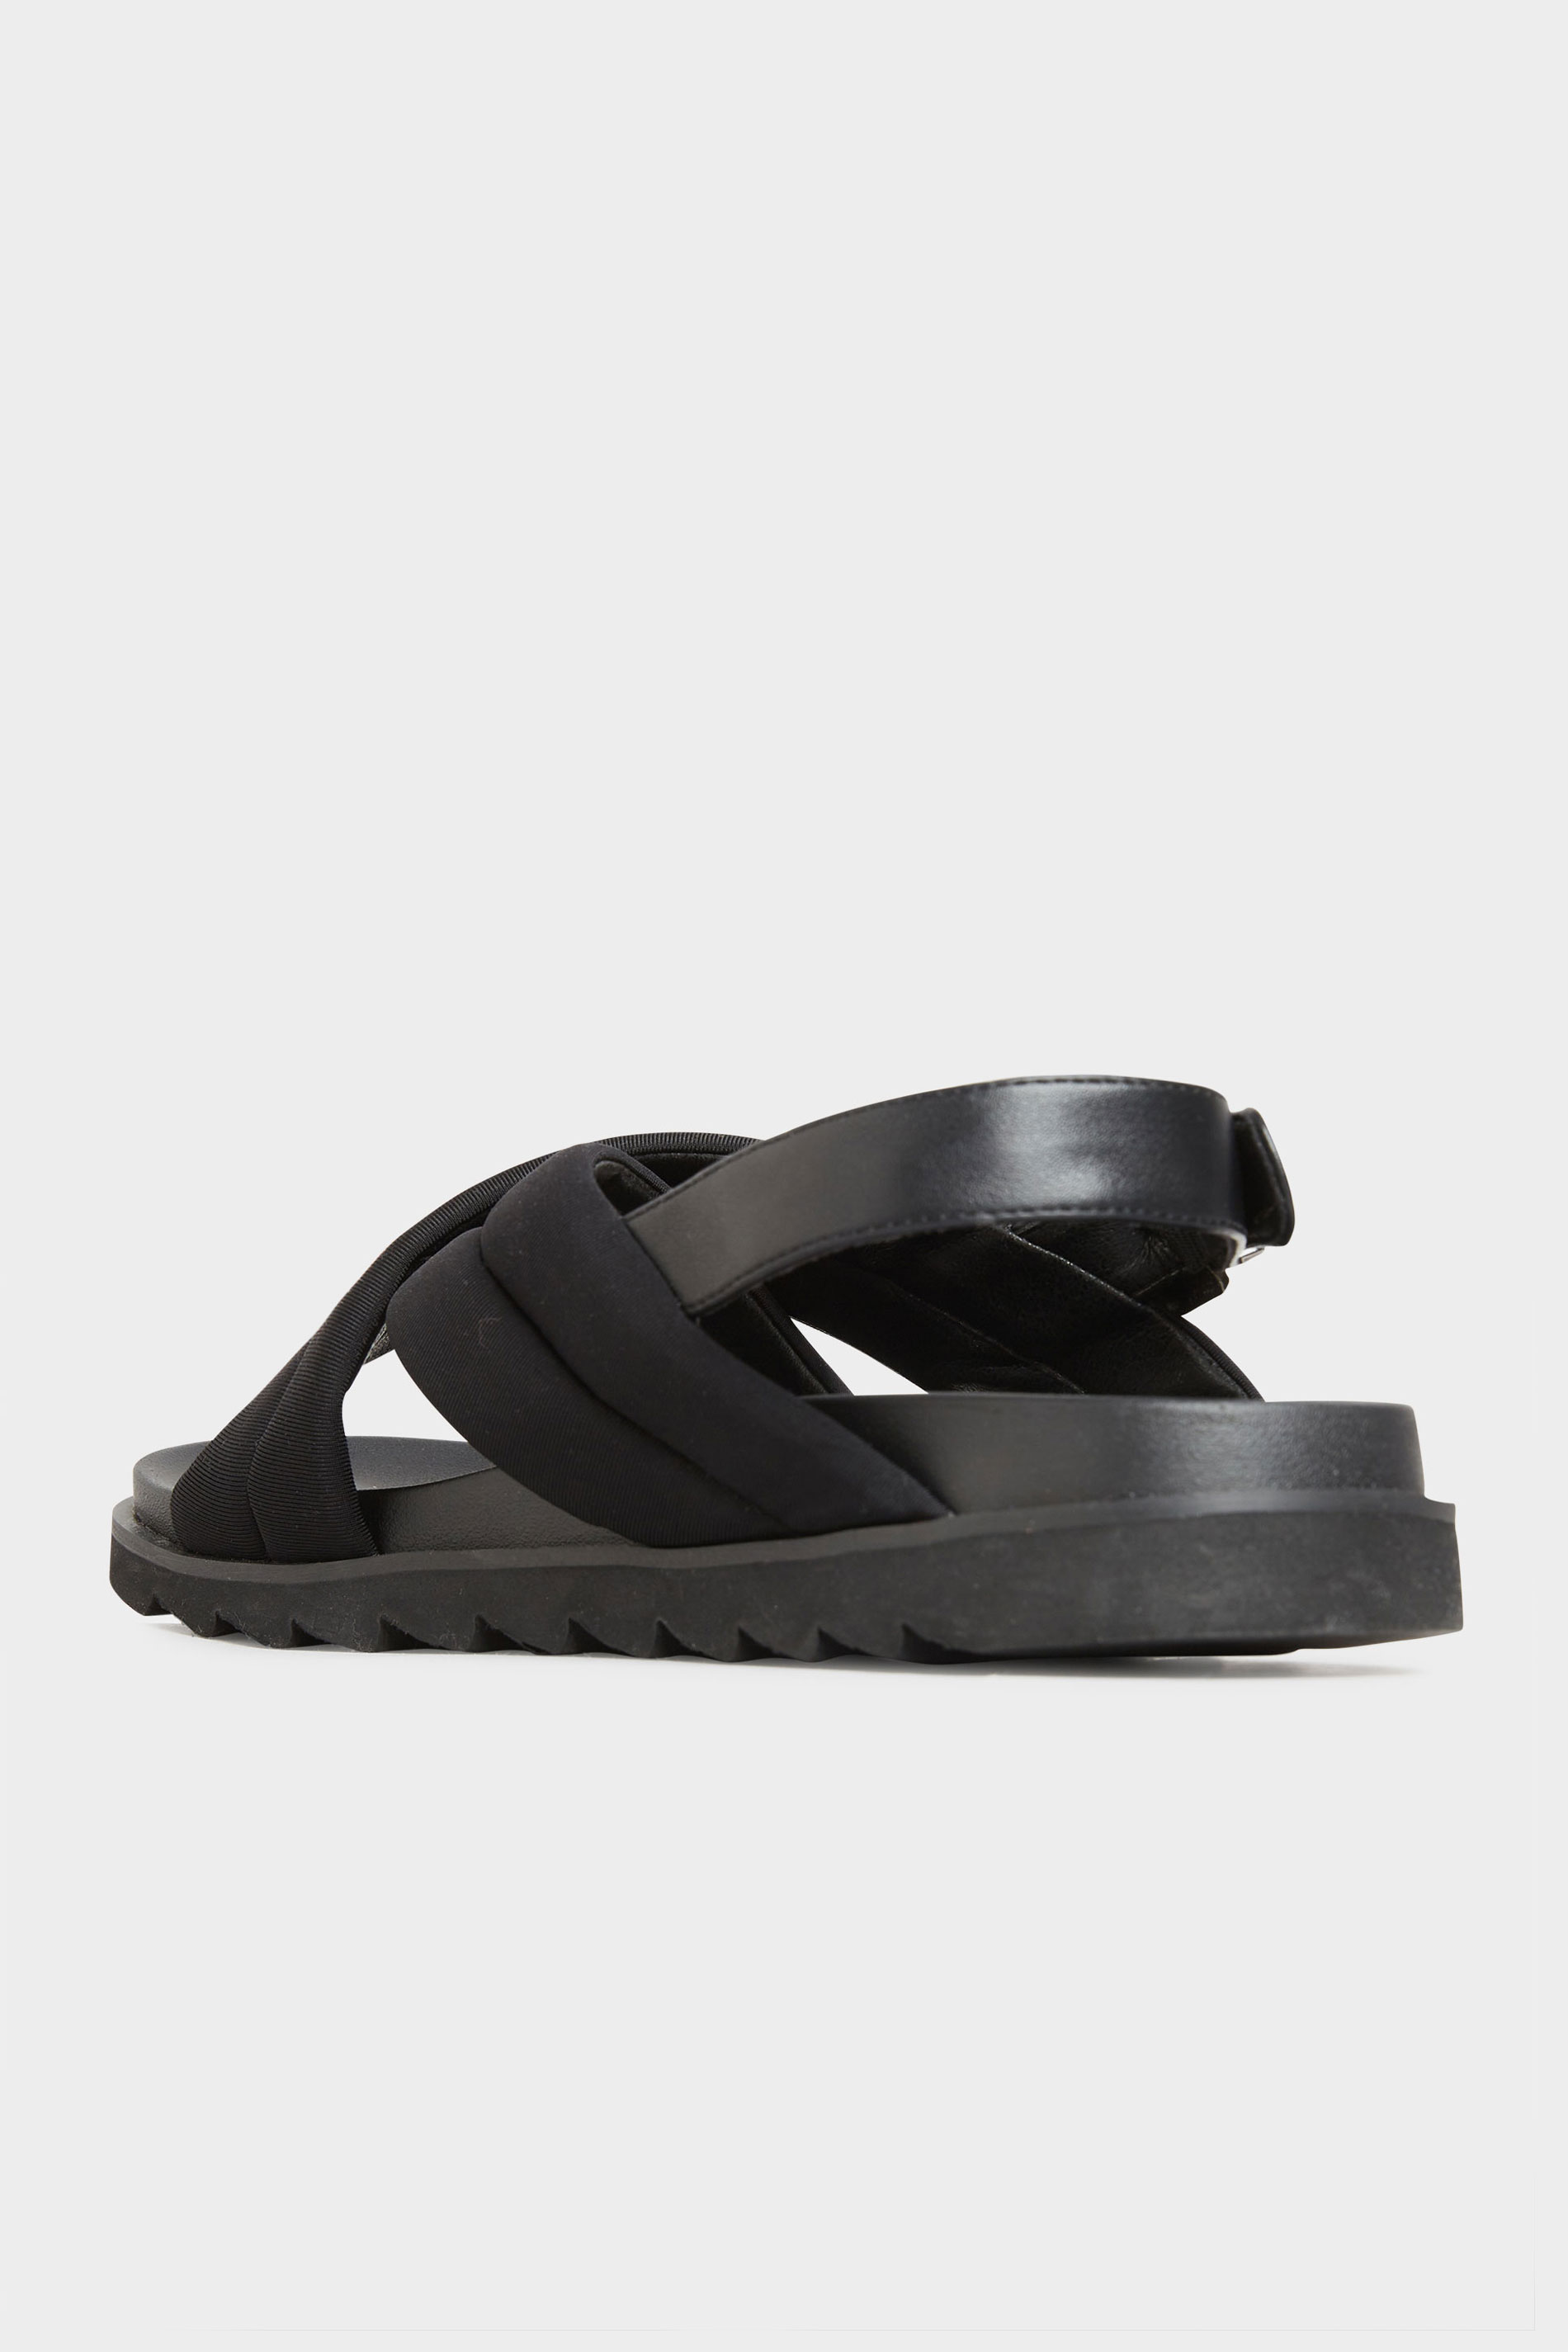 LIMITED COLLECTION Black Padded Sandals In Extra Wide Fit | Long Tall Sally